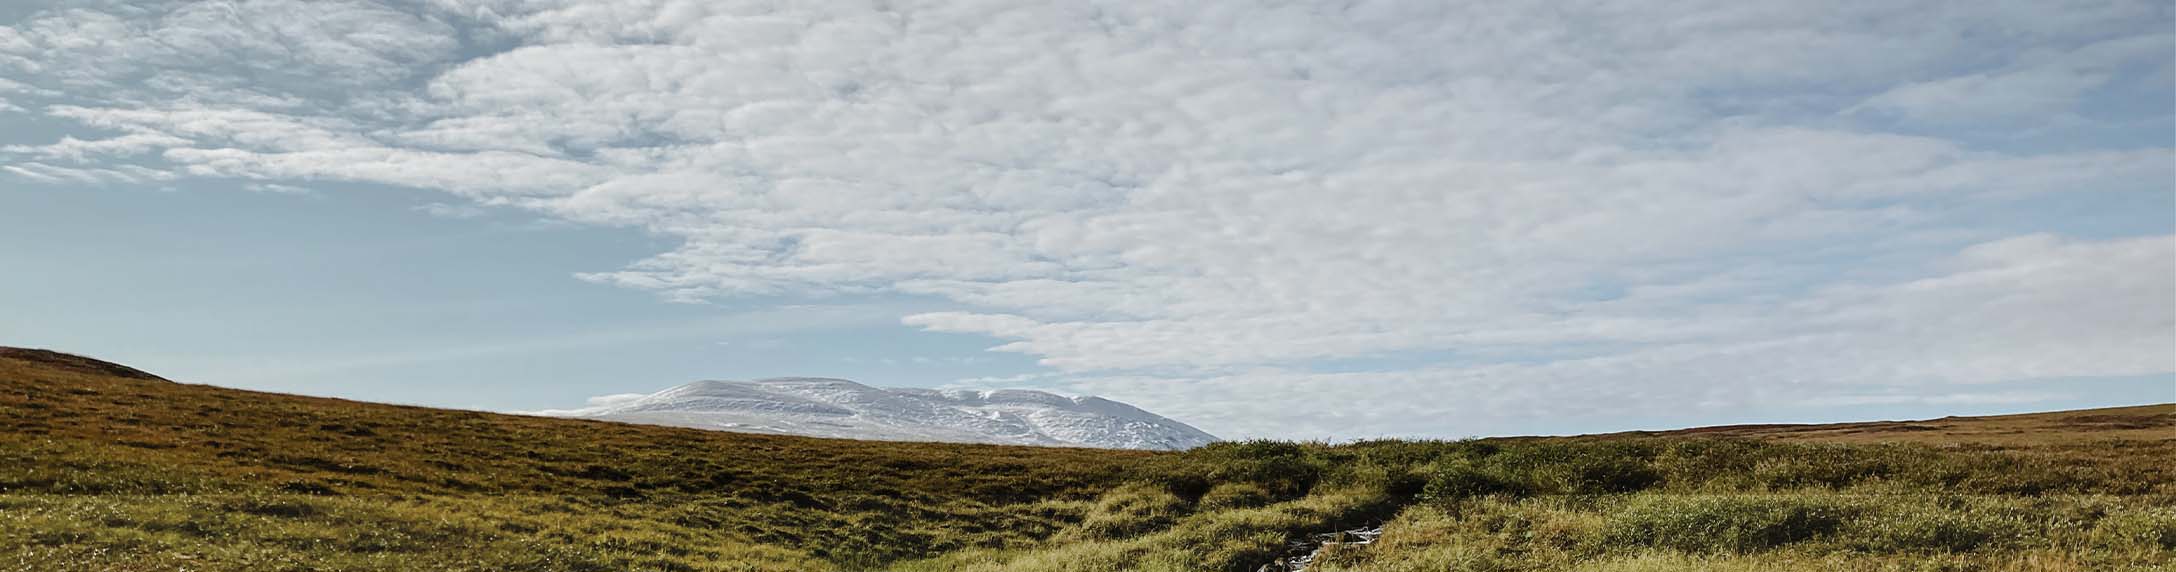 Barren arctic landscape of grass and snowy mountains.